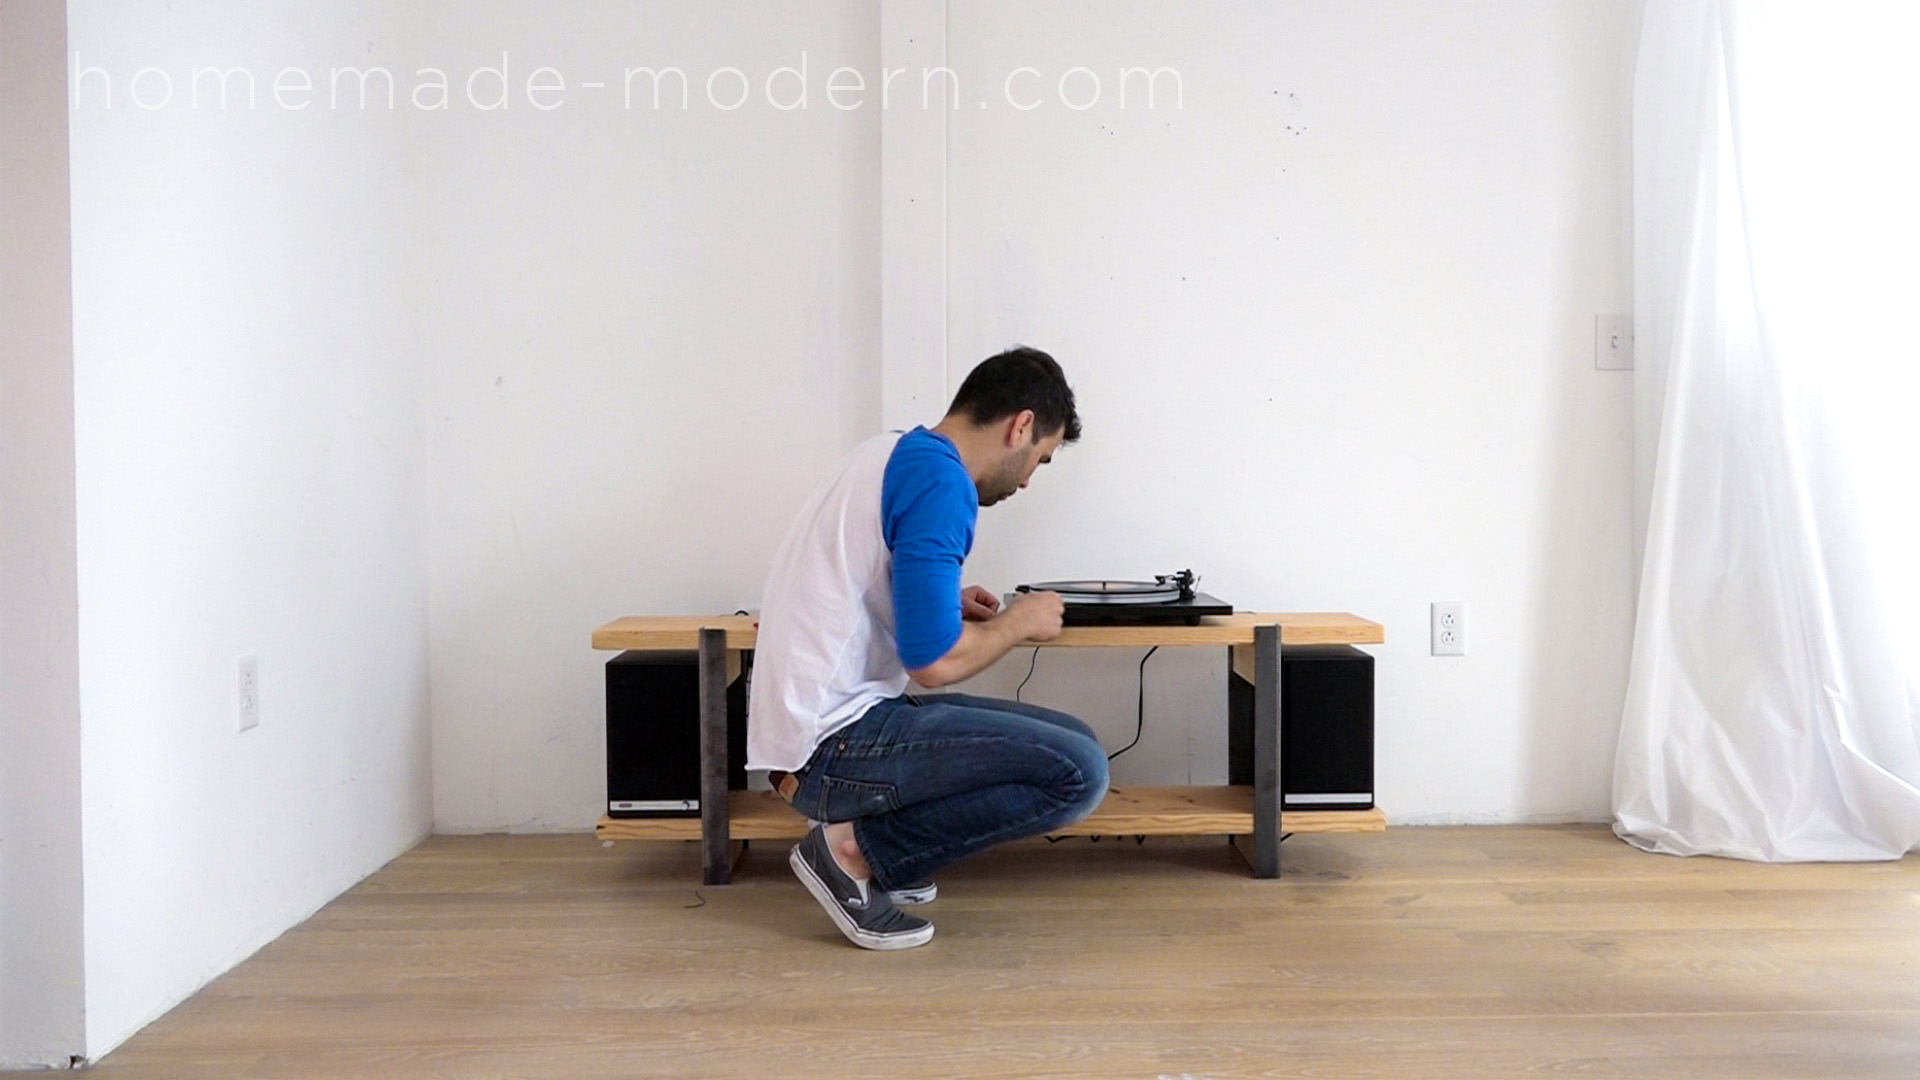 This DIY Media Console is made out of 2x12 and angle irons and the shelves were designed to store vinyl records. For more information go to HomeMade-Modern.com